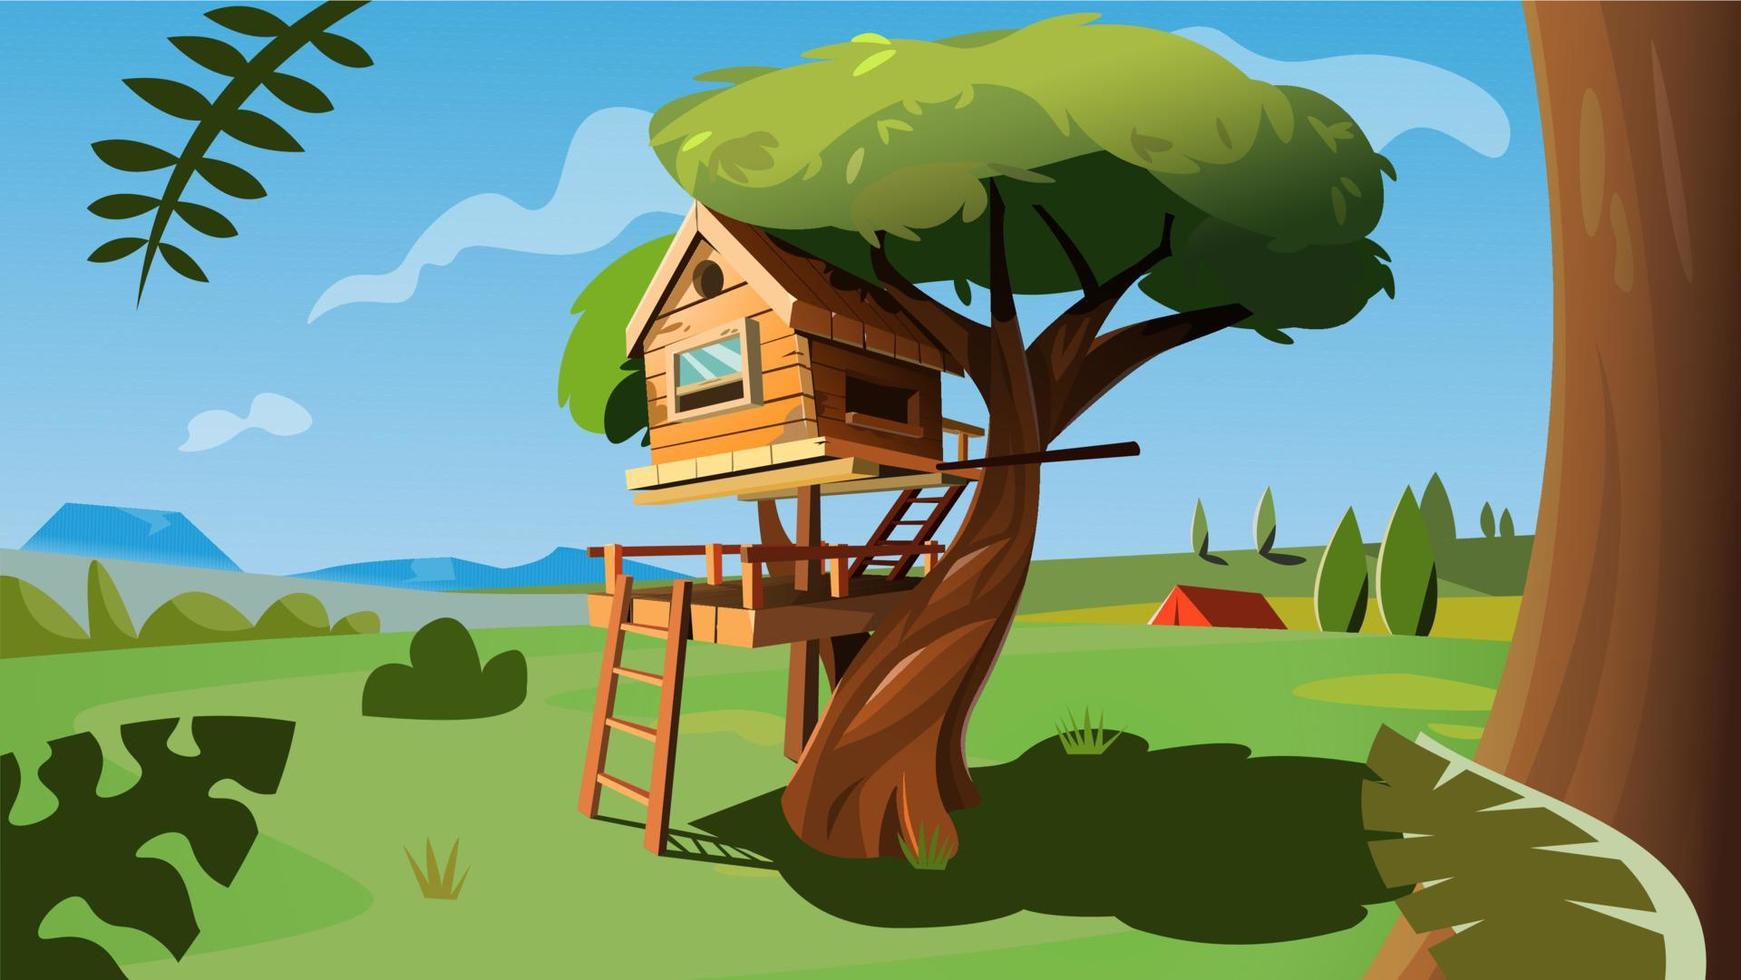 House on tree childish, ladder and swing on backyard playground vector